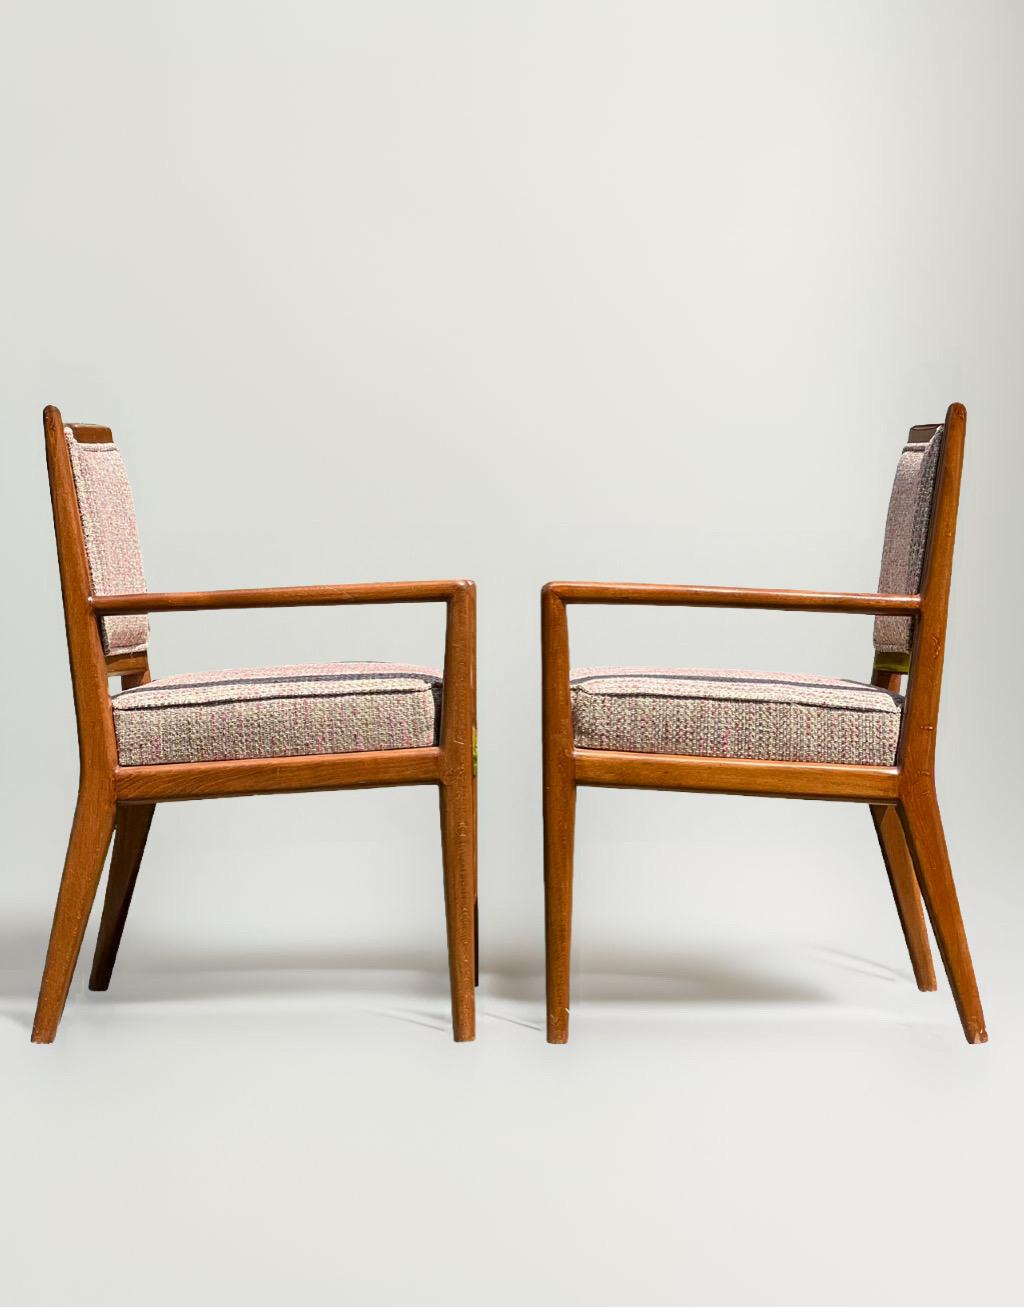 Handsome pair of vintage Mid Century Modern arm chairs with new upholstery.

Sturdy and beautifully crafted, these substantially sized chairs have been refreshed with a high quality, finely woven neutral fabric. The frames are in very good vintage